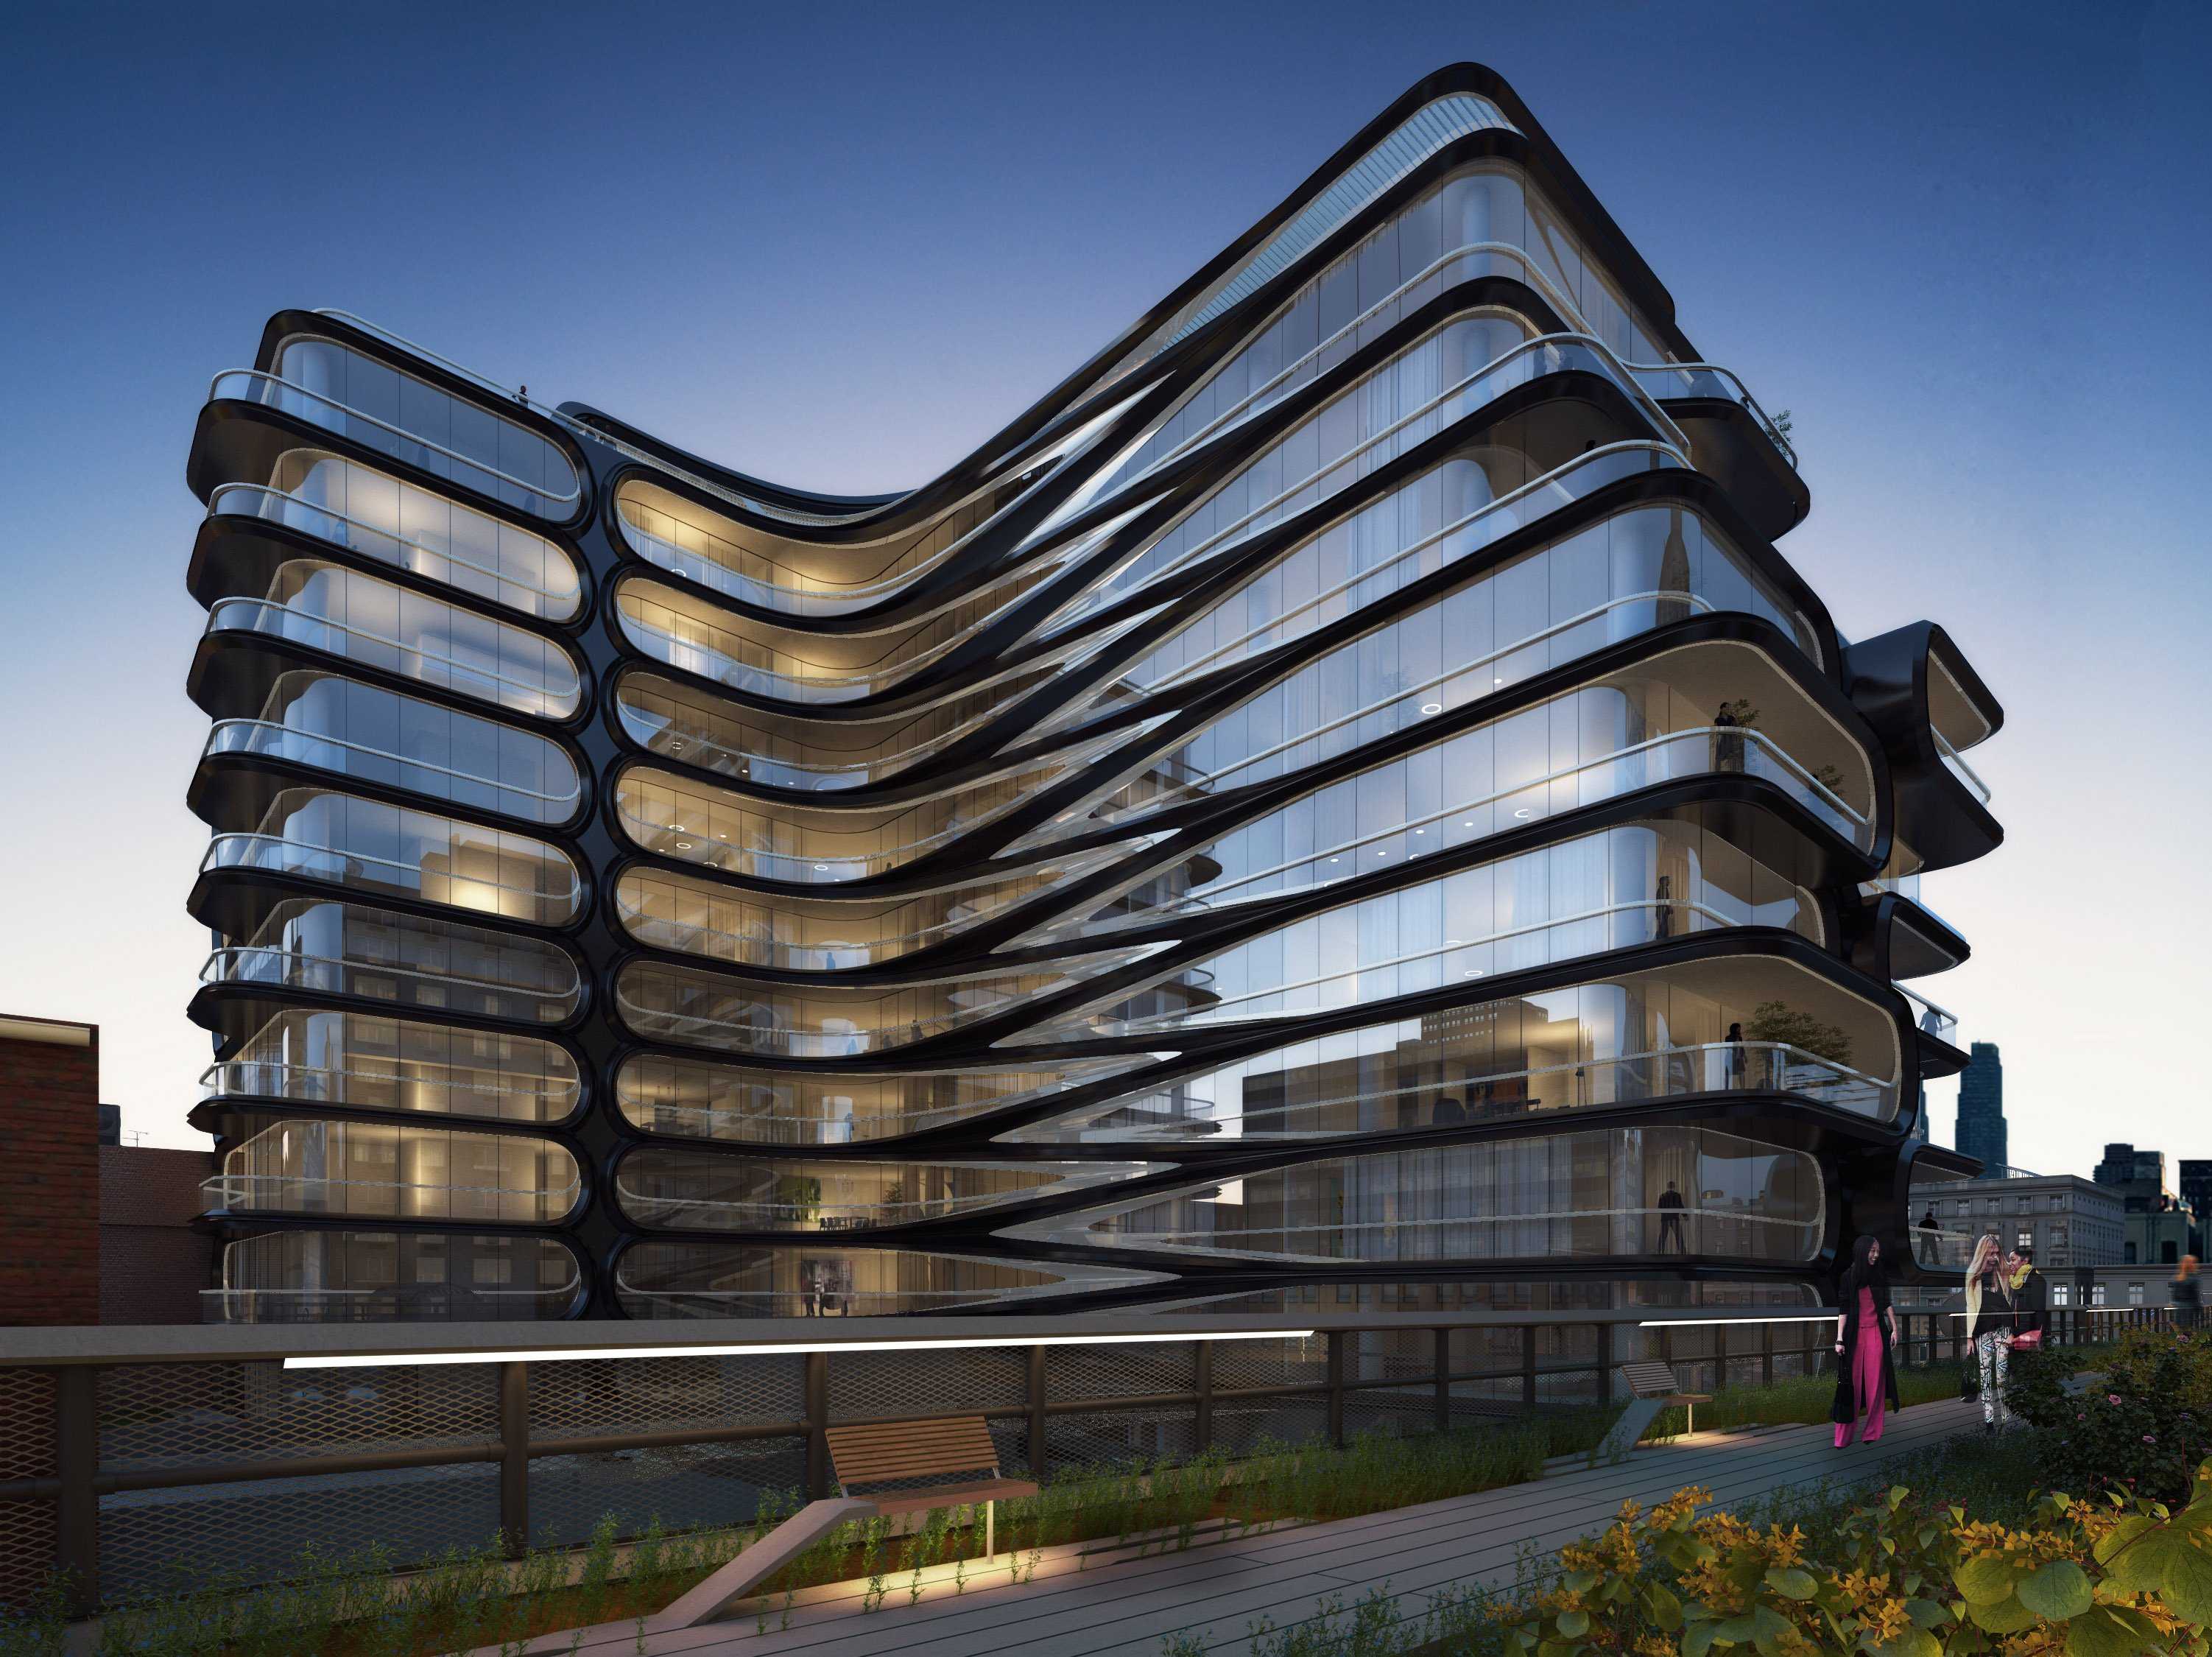 famed-architect-zaha-hadid-unveils-her-first-building-in-new-york ...